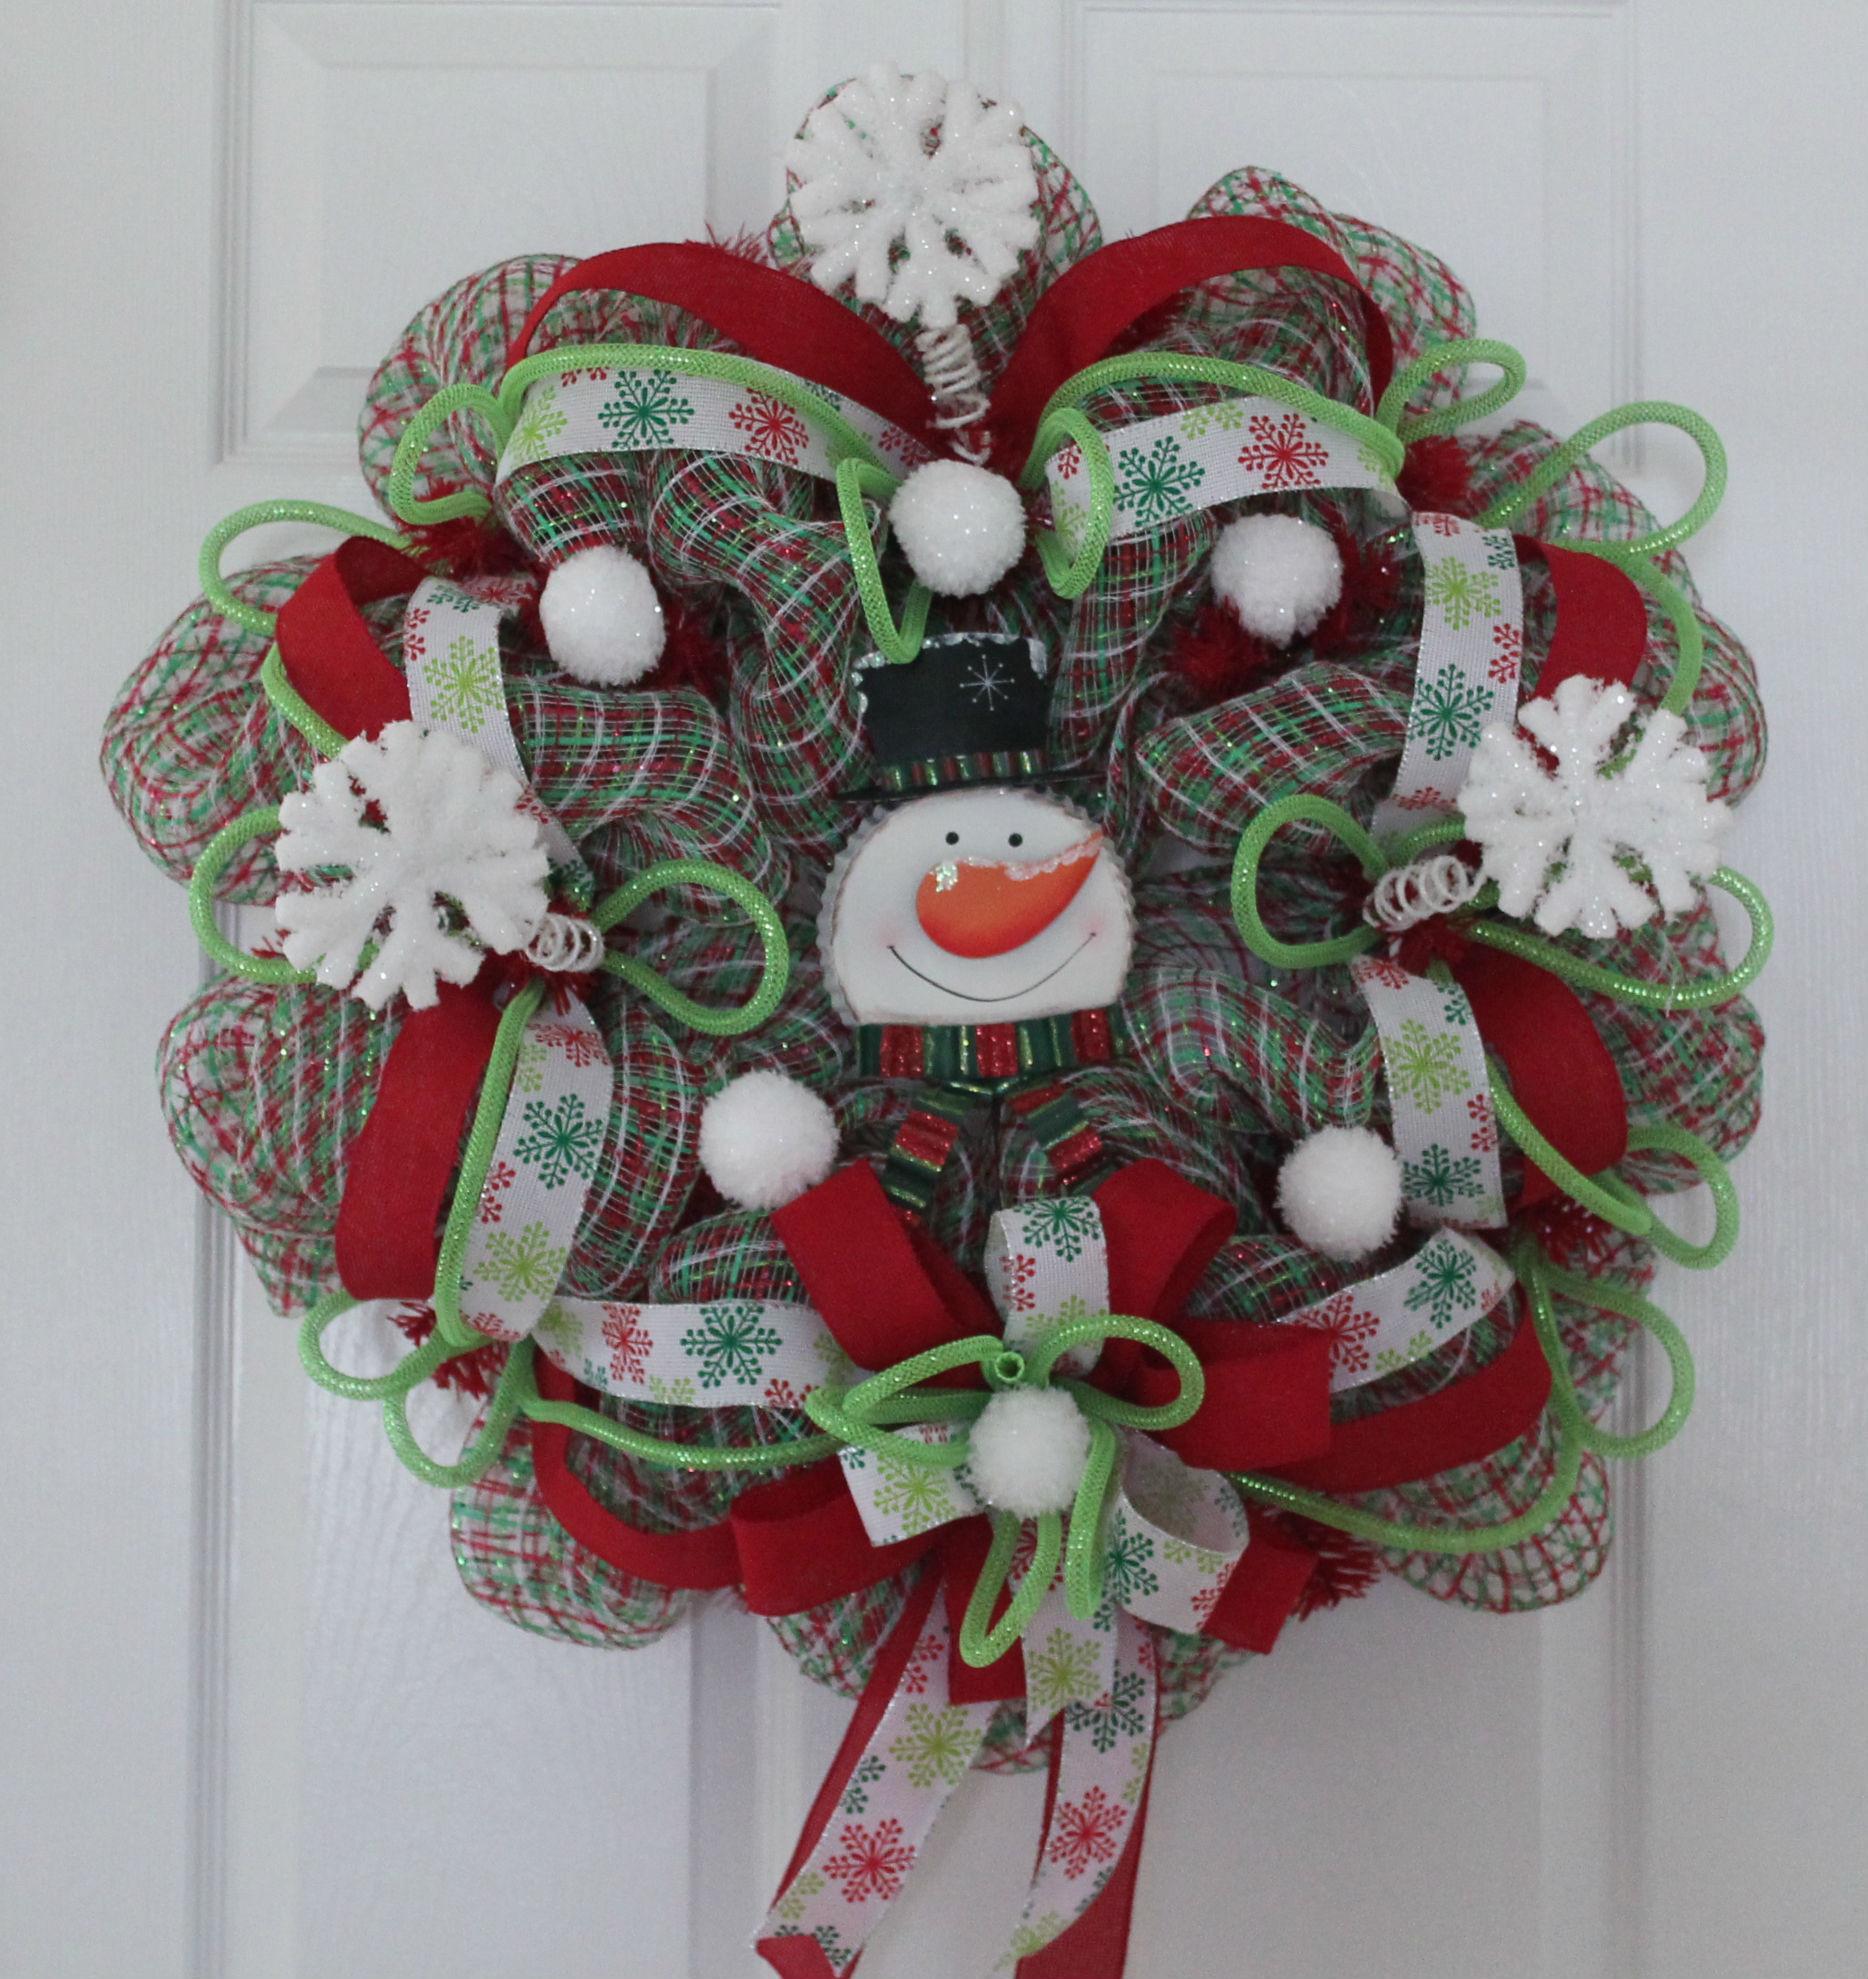 DIY Mesh Christmas Wreath
 DIY Mesh Christmas Wreath "Baby It s Cold Outside" The